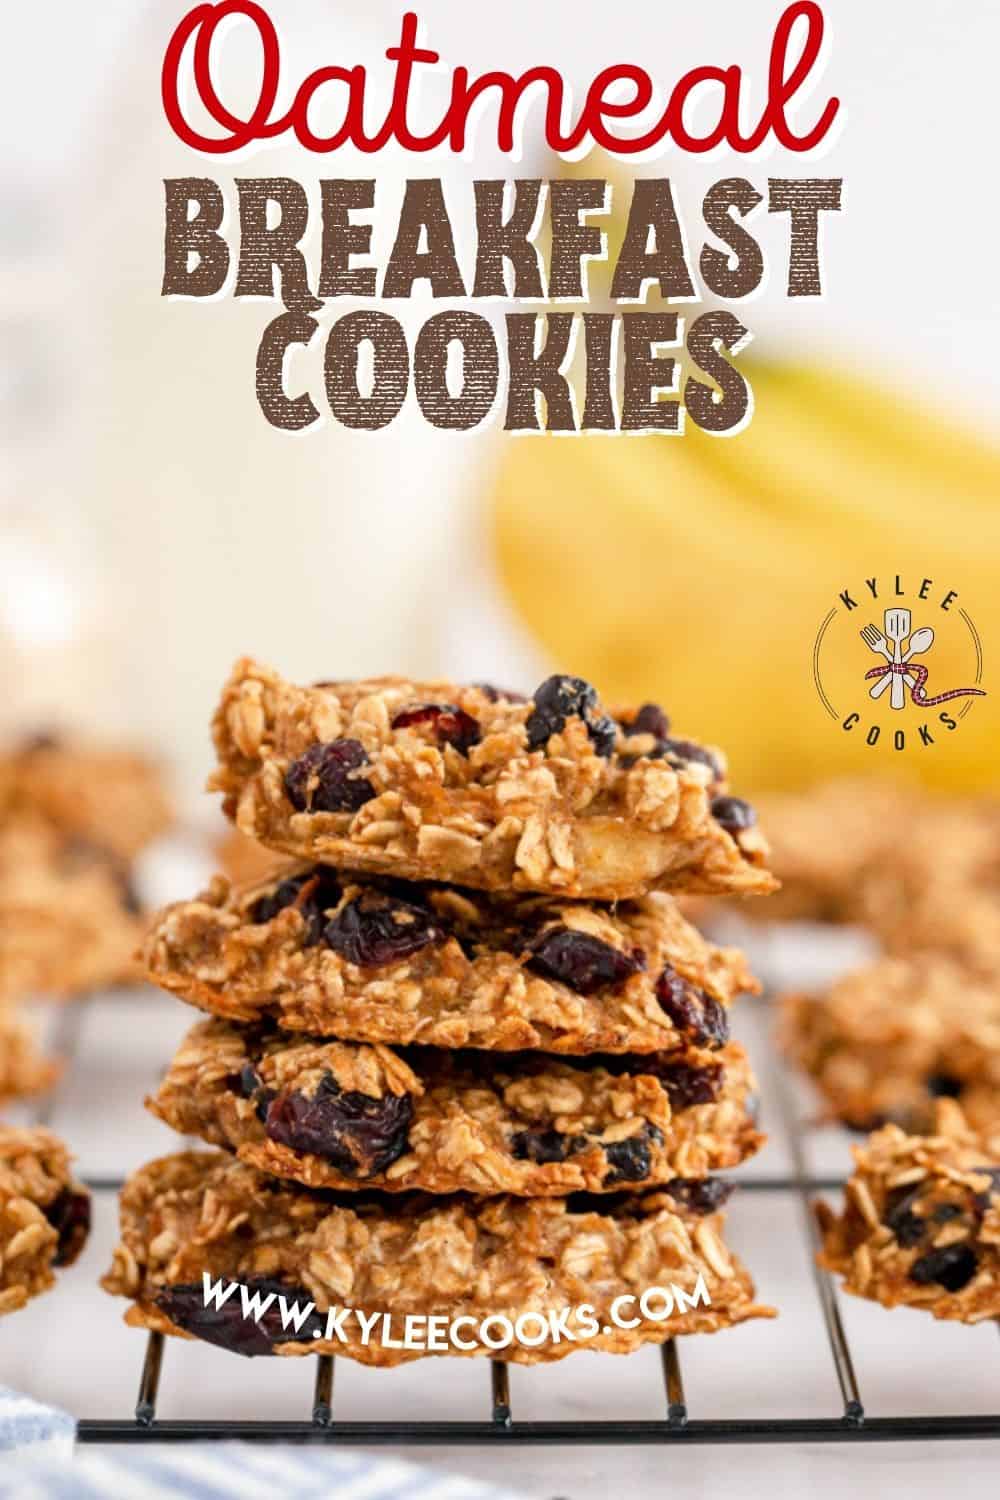 oatmeal breakfast cookies with recipe title overlaid in text